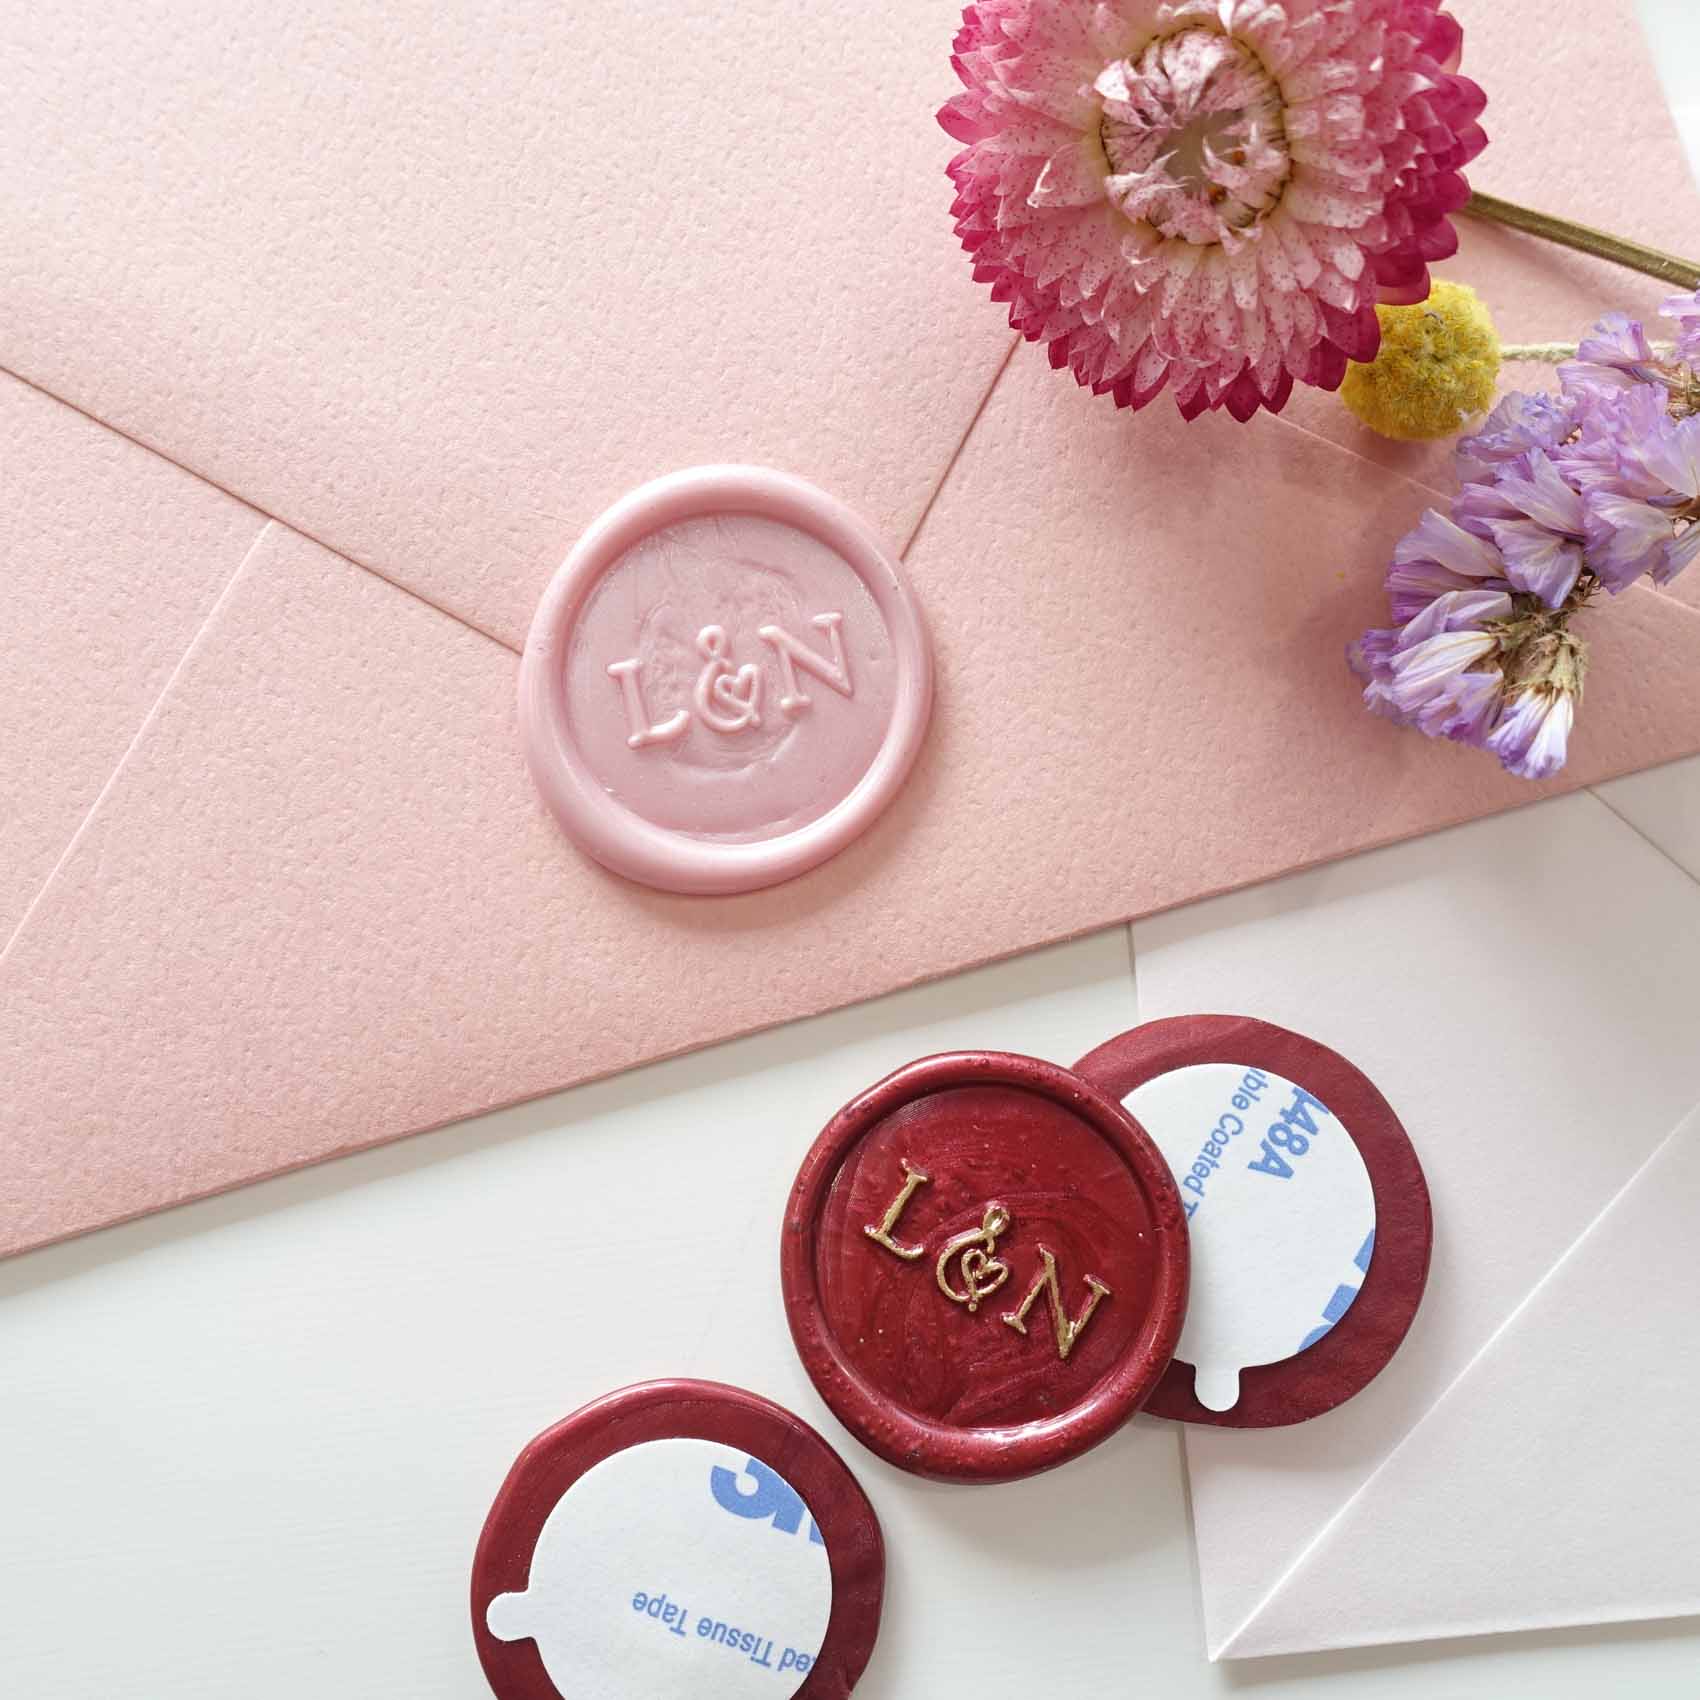 simple heart wedding initials custom wax seal stickers premade with adhesive backing by fiona ariva australia